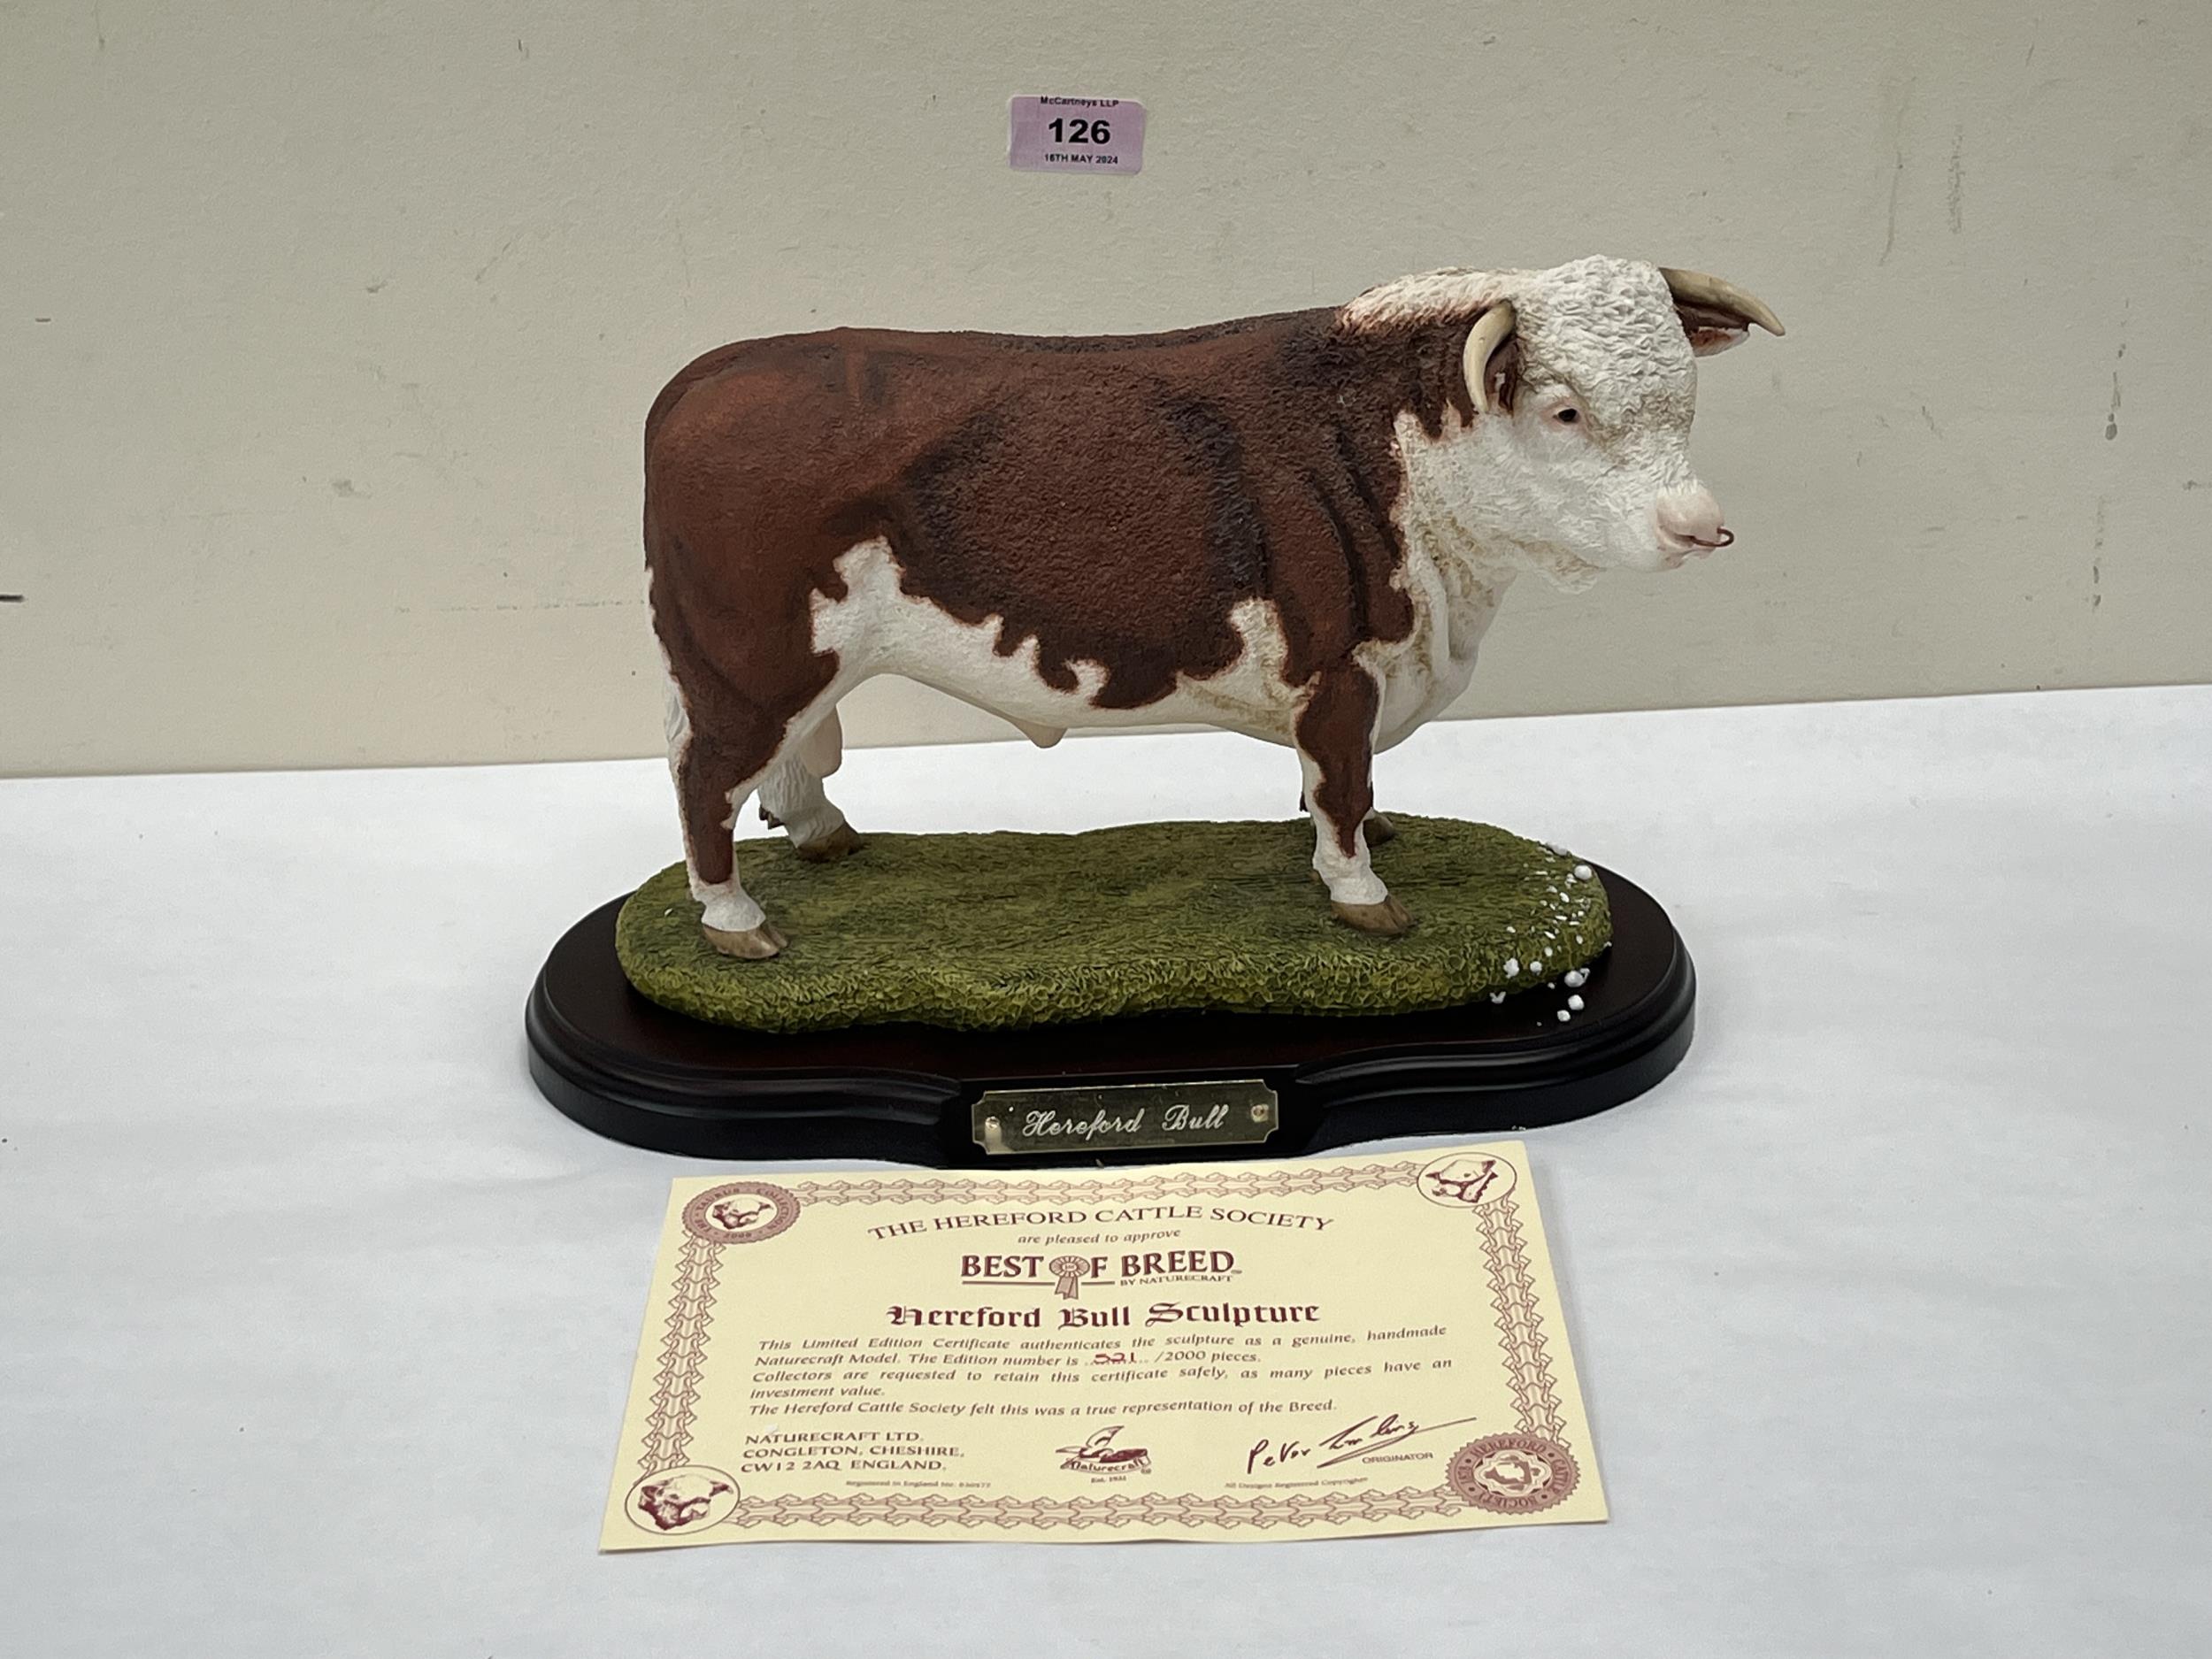 A Best Of Breed Hereford Bull resinous sculpture for the Hereford Cattle Society. Limited edition